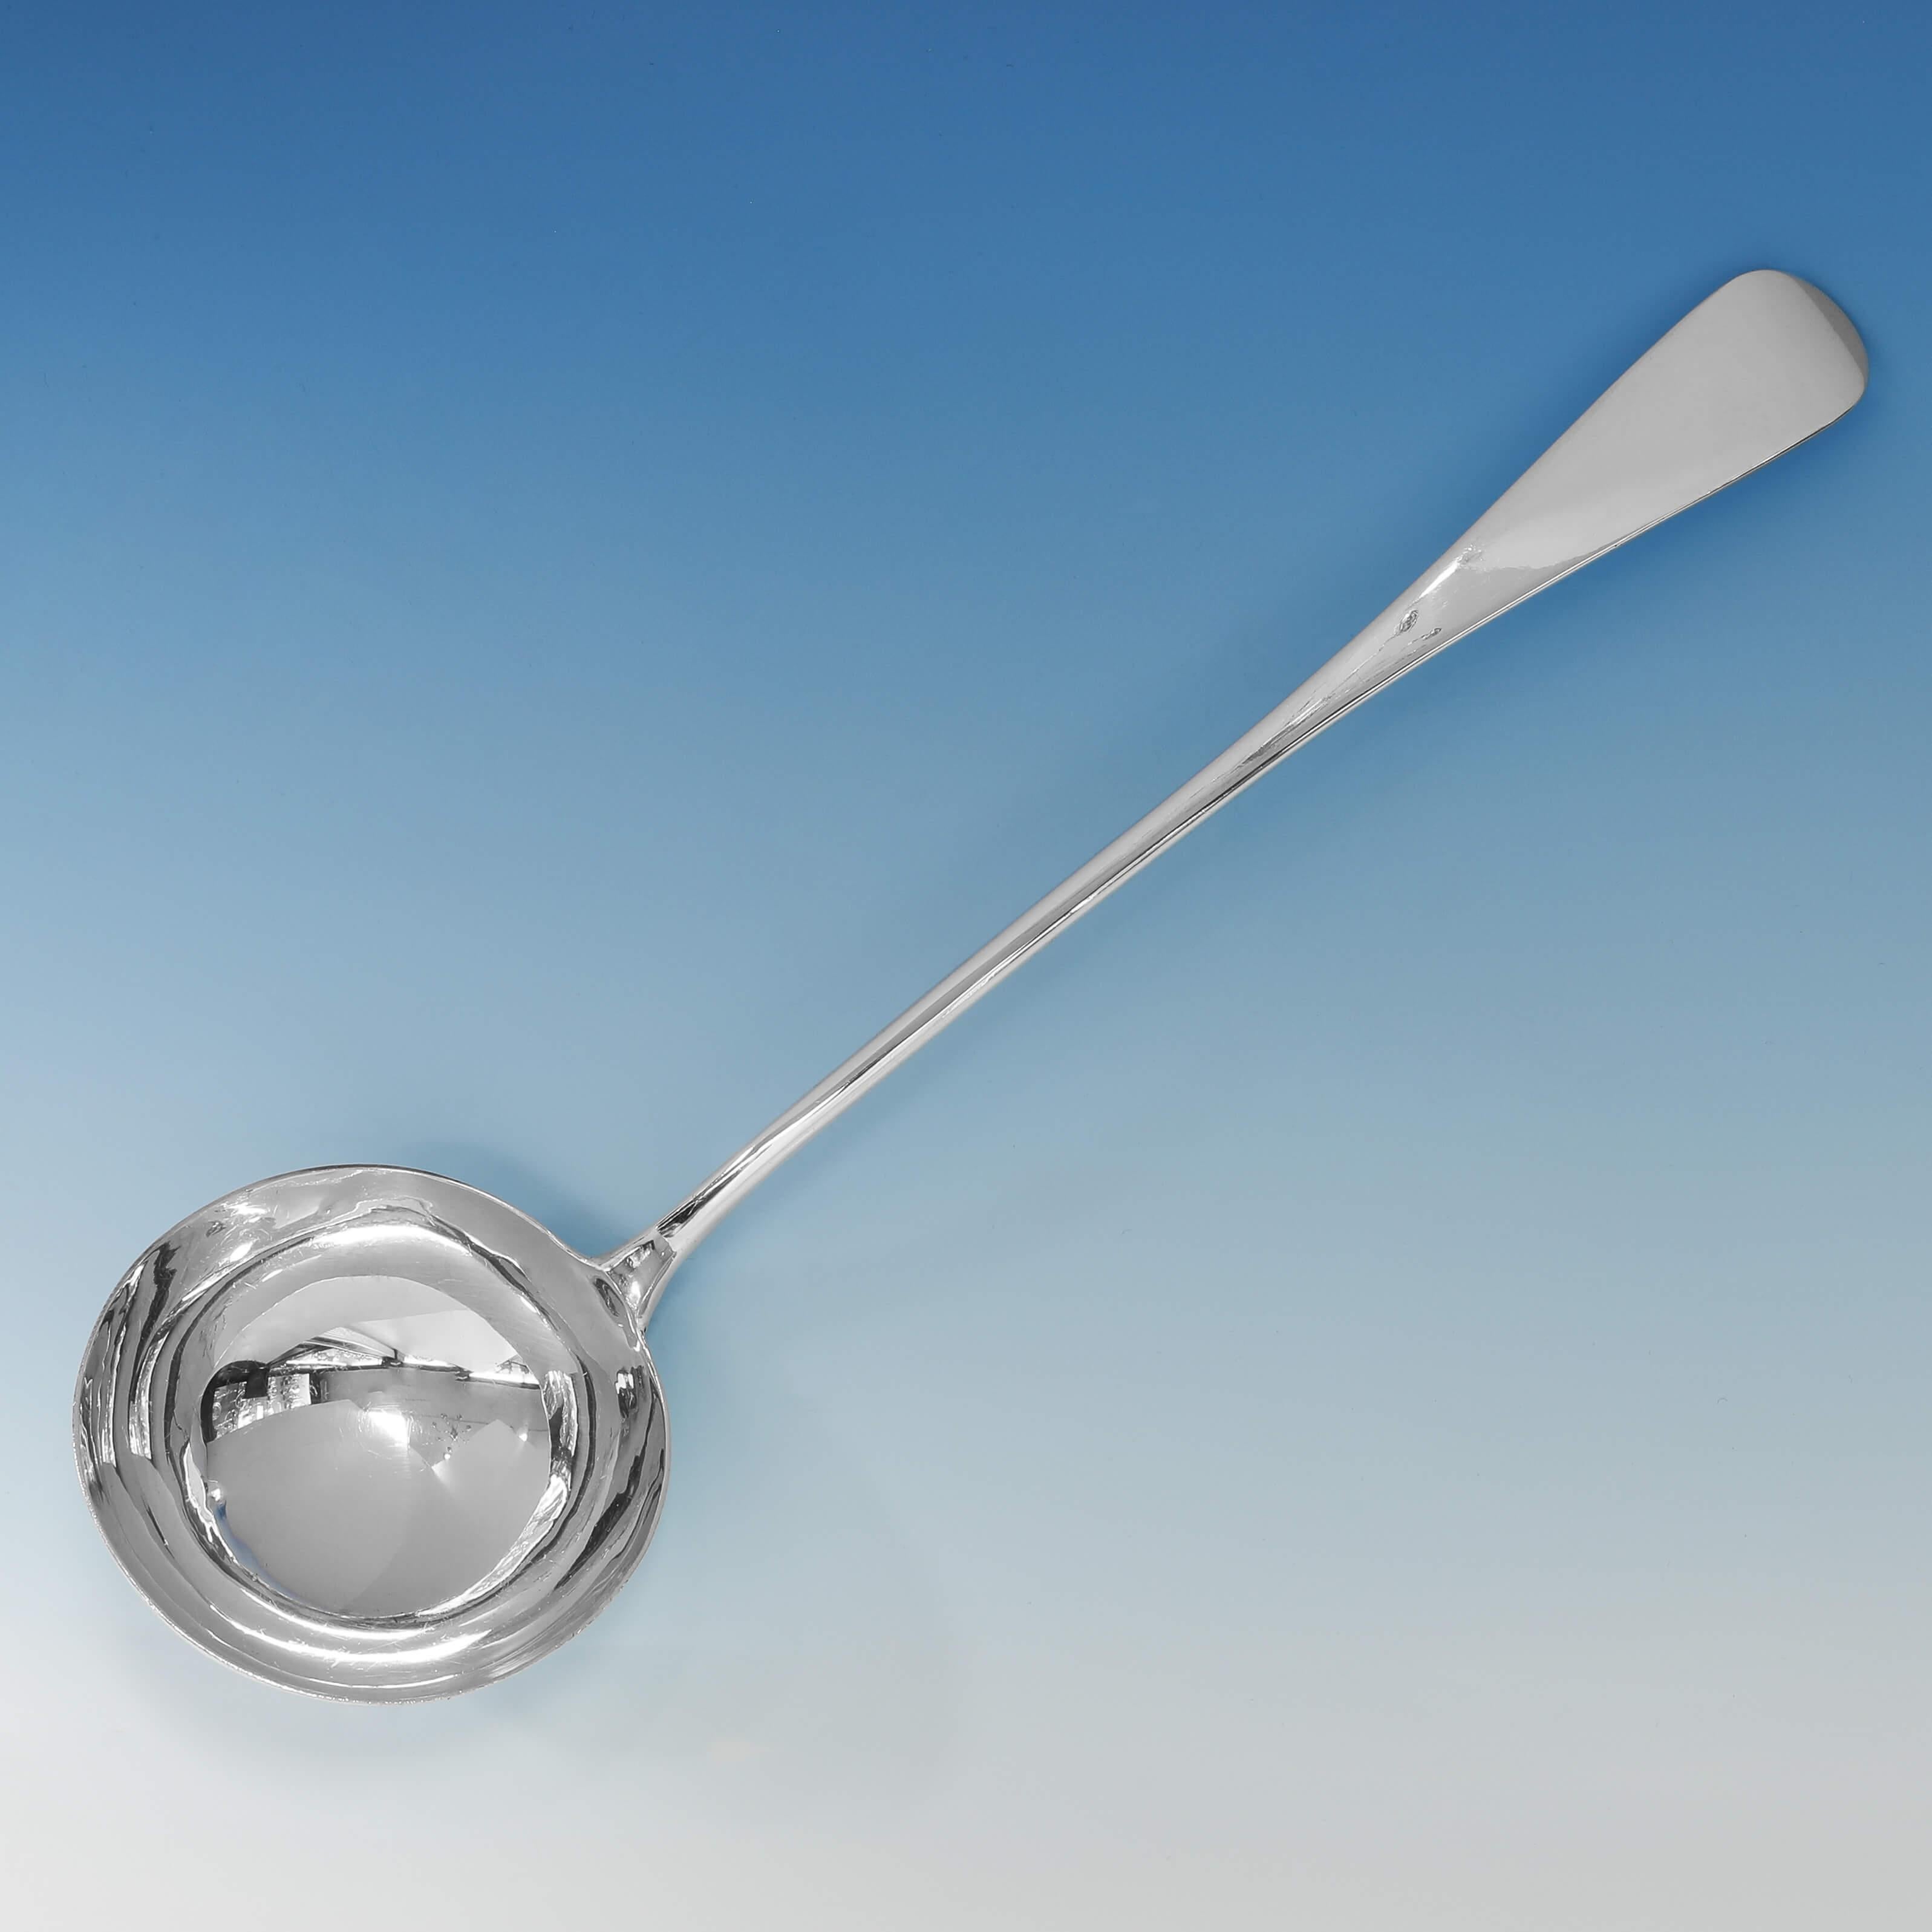 Hallmarked in London in 1861 by George Adams, this handsome, Victorian, antique sterling silver soup ladle, is in 'Old English' pattern. The soup ladle measures 13.5